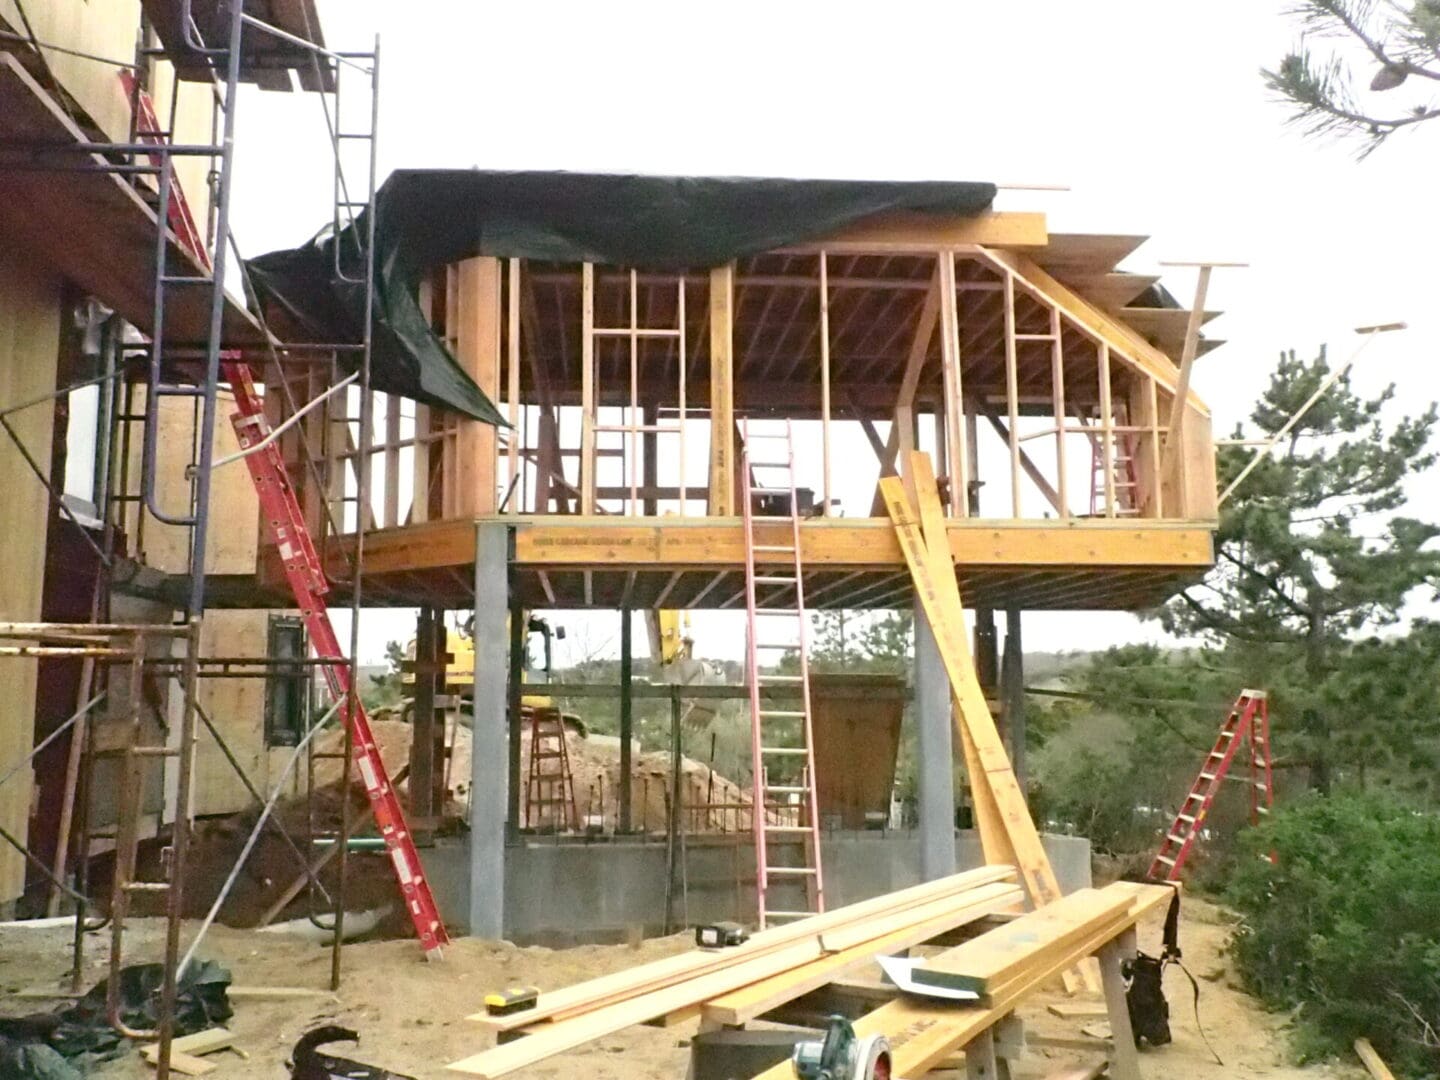 A building being built with scaffolding and wooden beams.